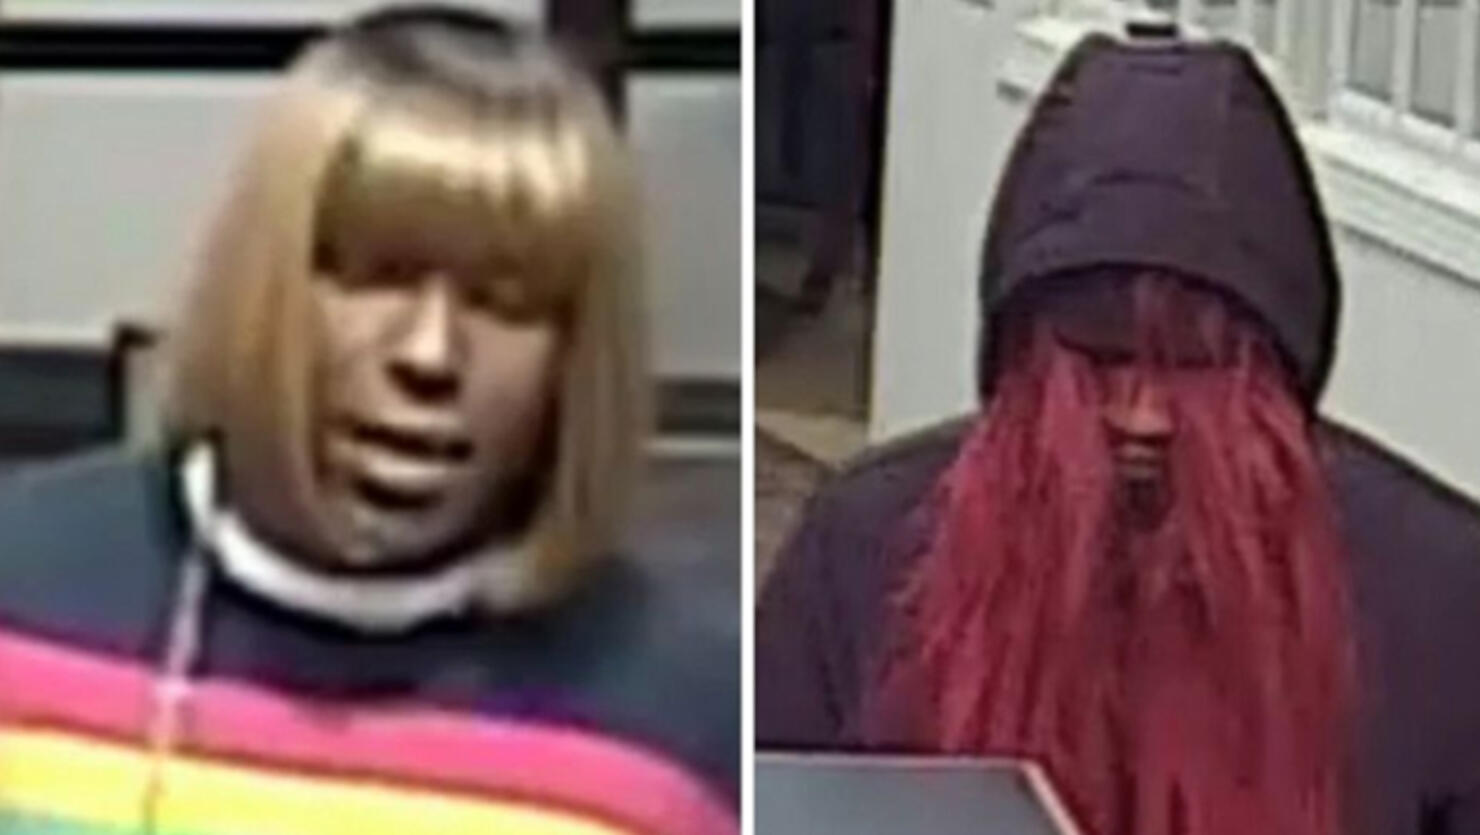 Surveillance video released by the FBI shows the "Big Wig Bandit" during bank robberies in Huntersville, N.C., on Dec. 13, 2019 and in Belmont, N.C., on Jan. 7, 2020.